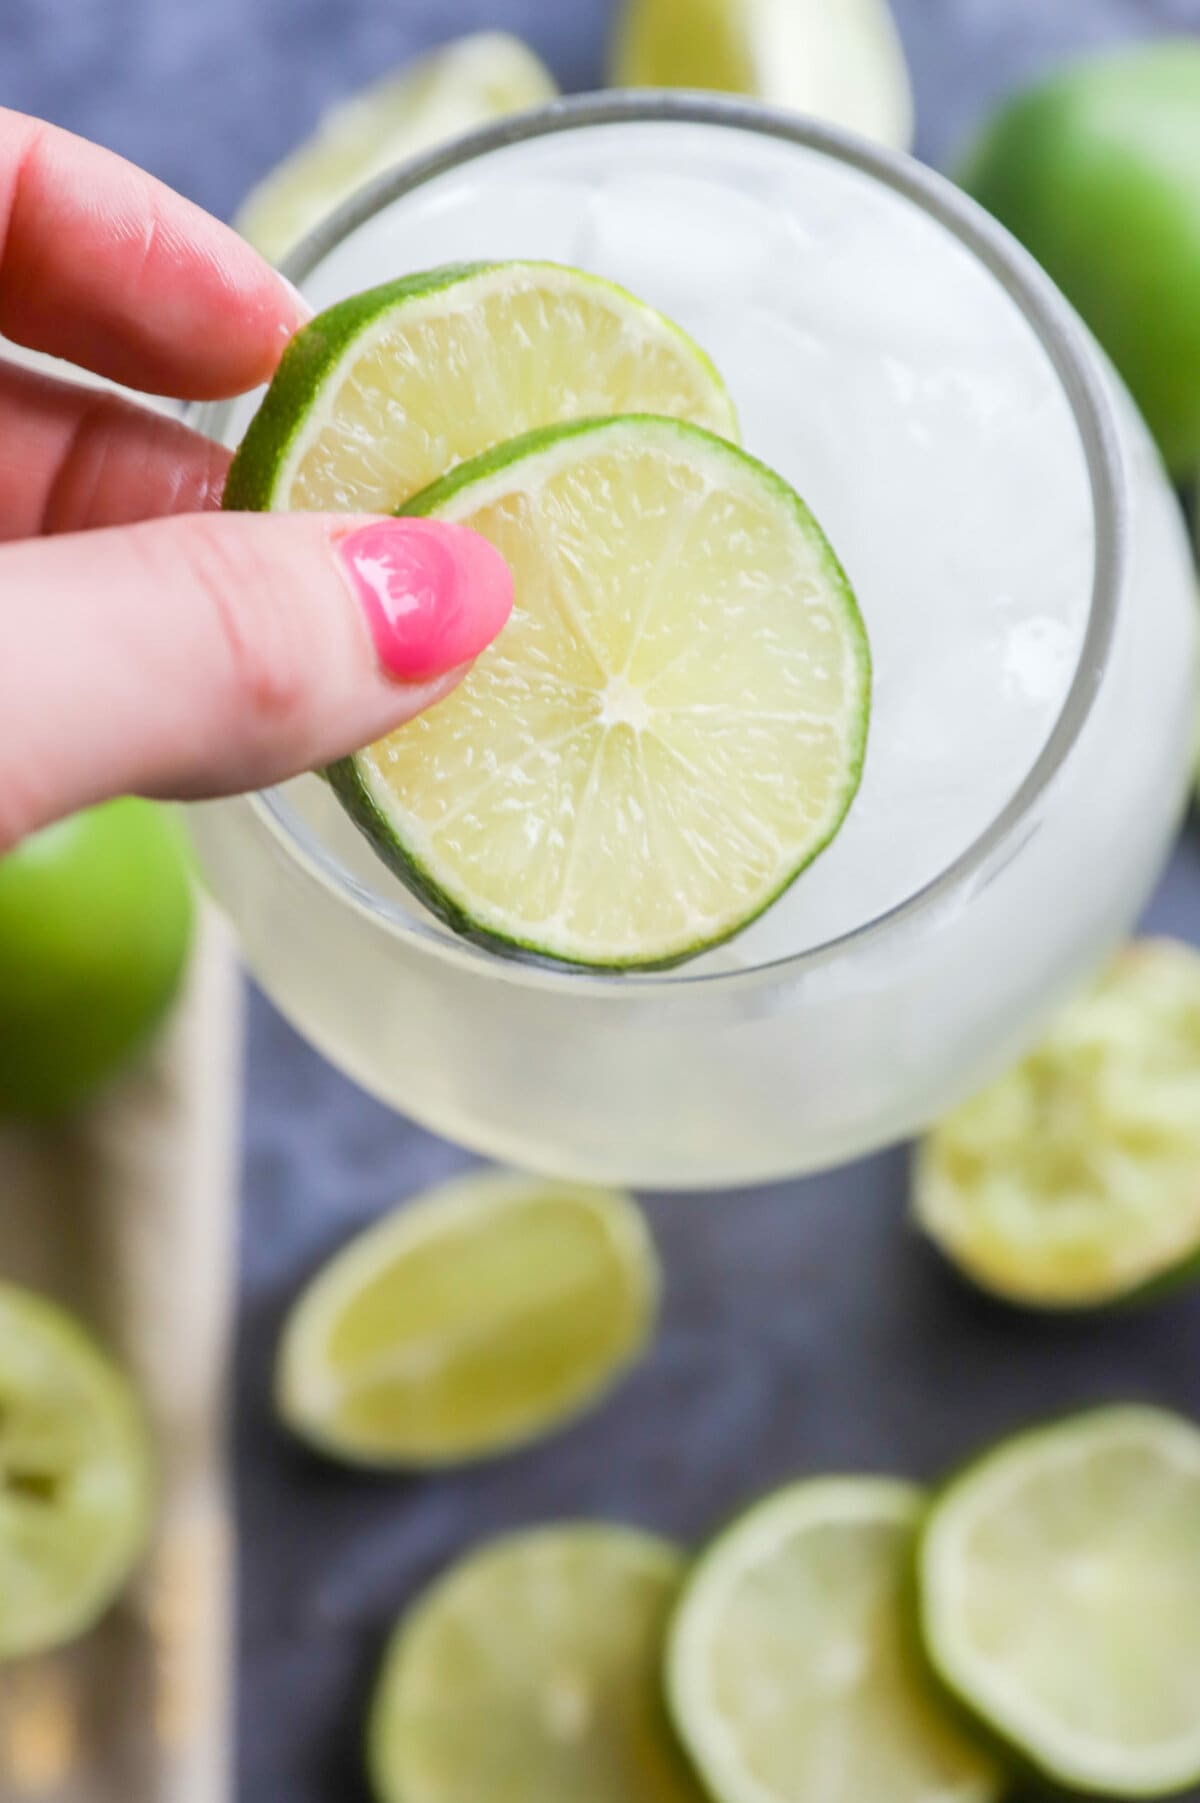 Add limes to a cocktail picture